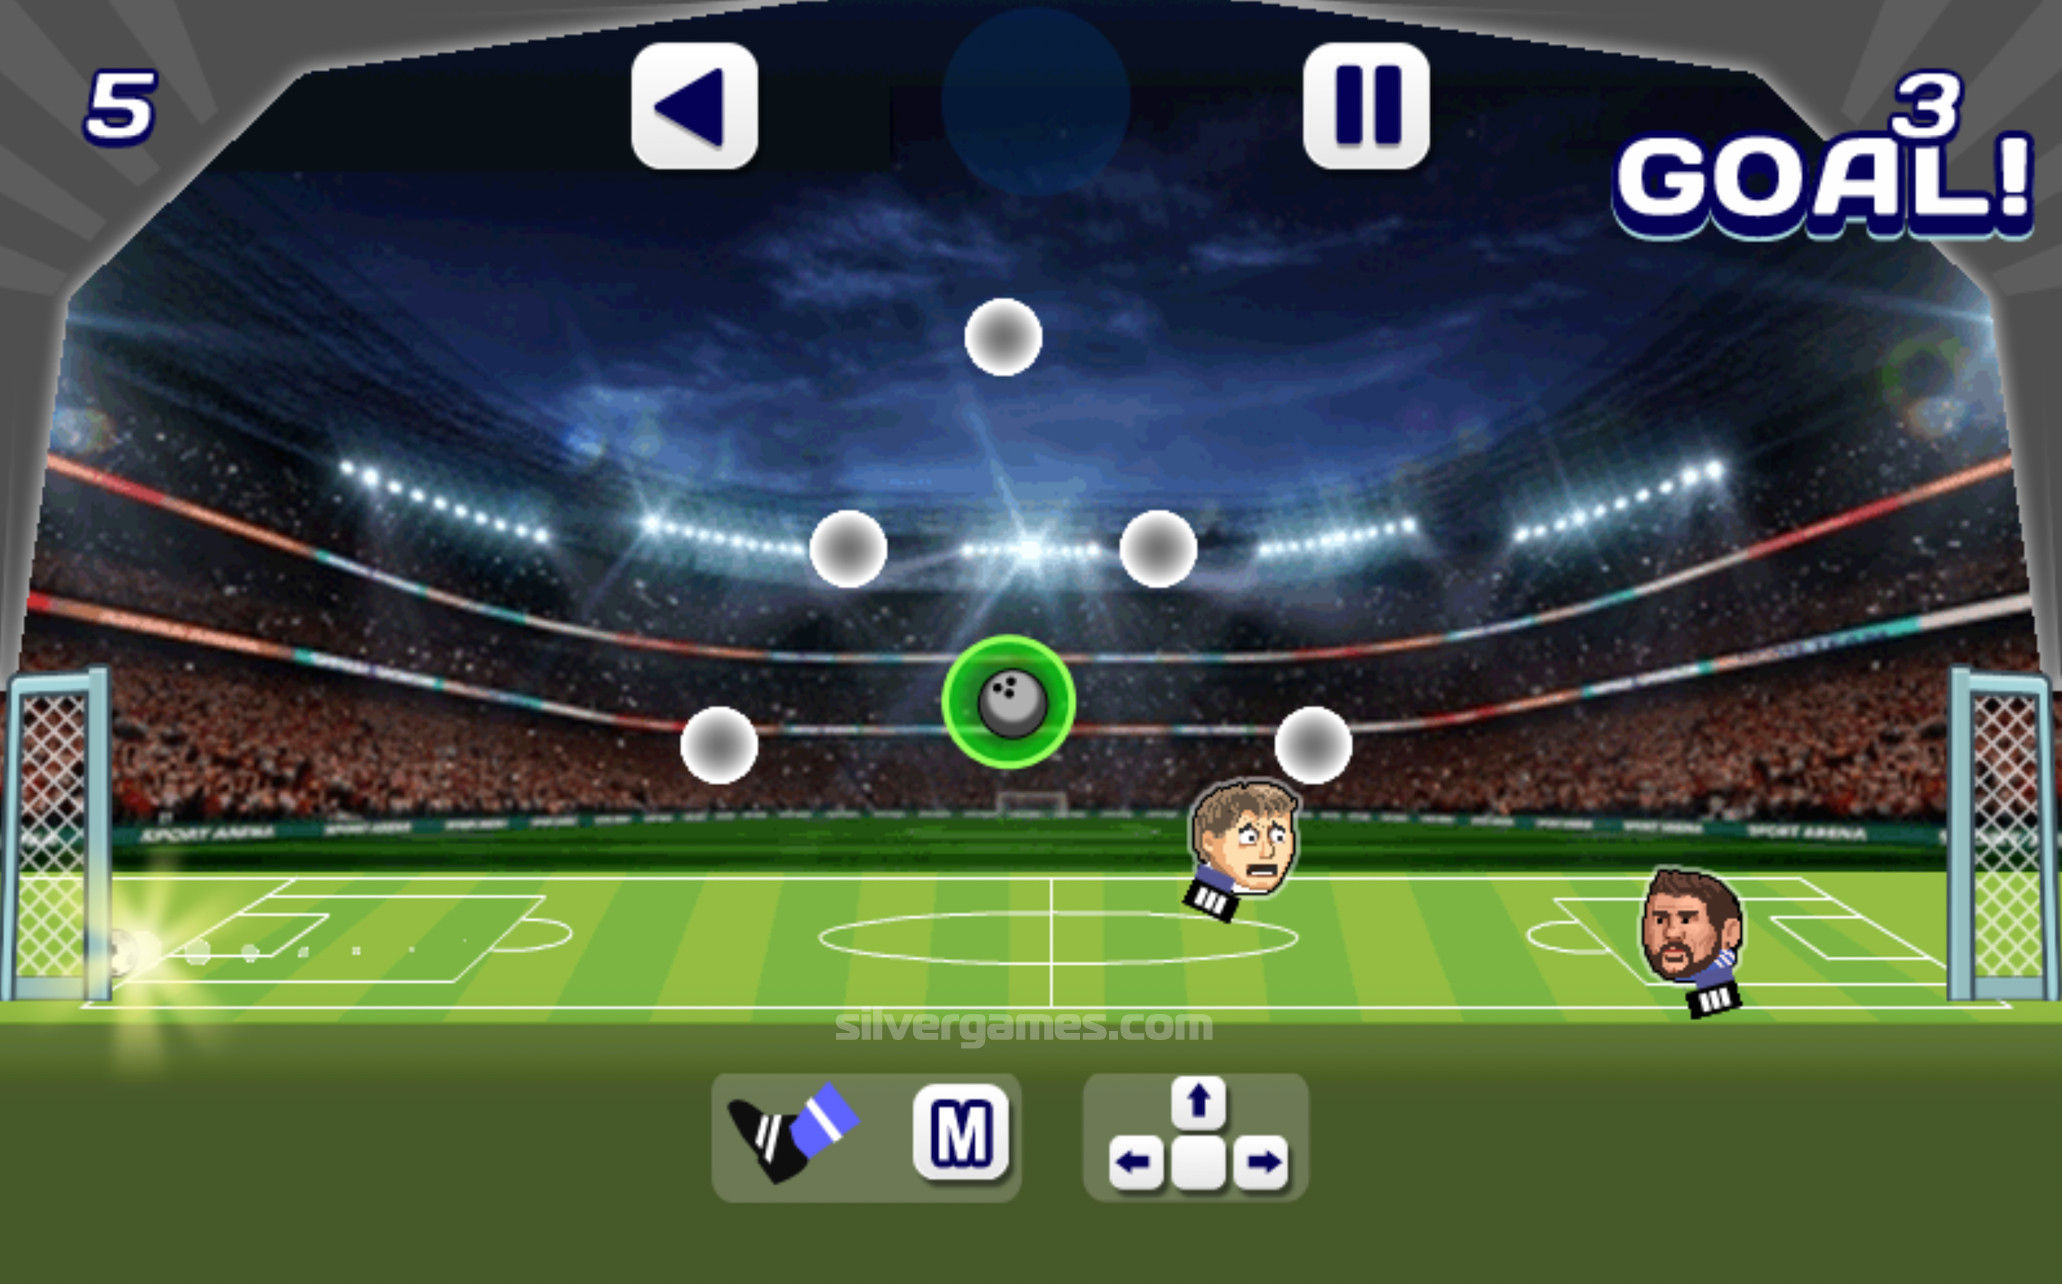 Football Headz Cup 2 - Play Online on SilverGames 🕹